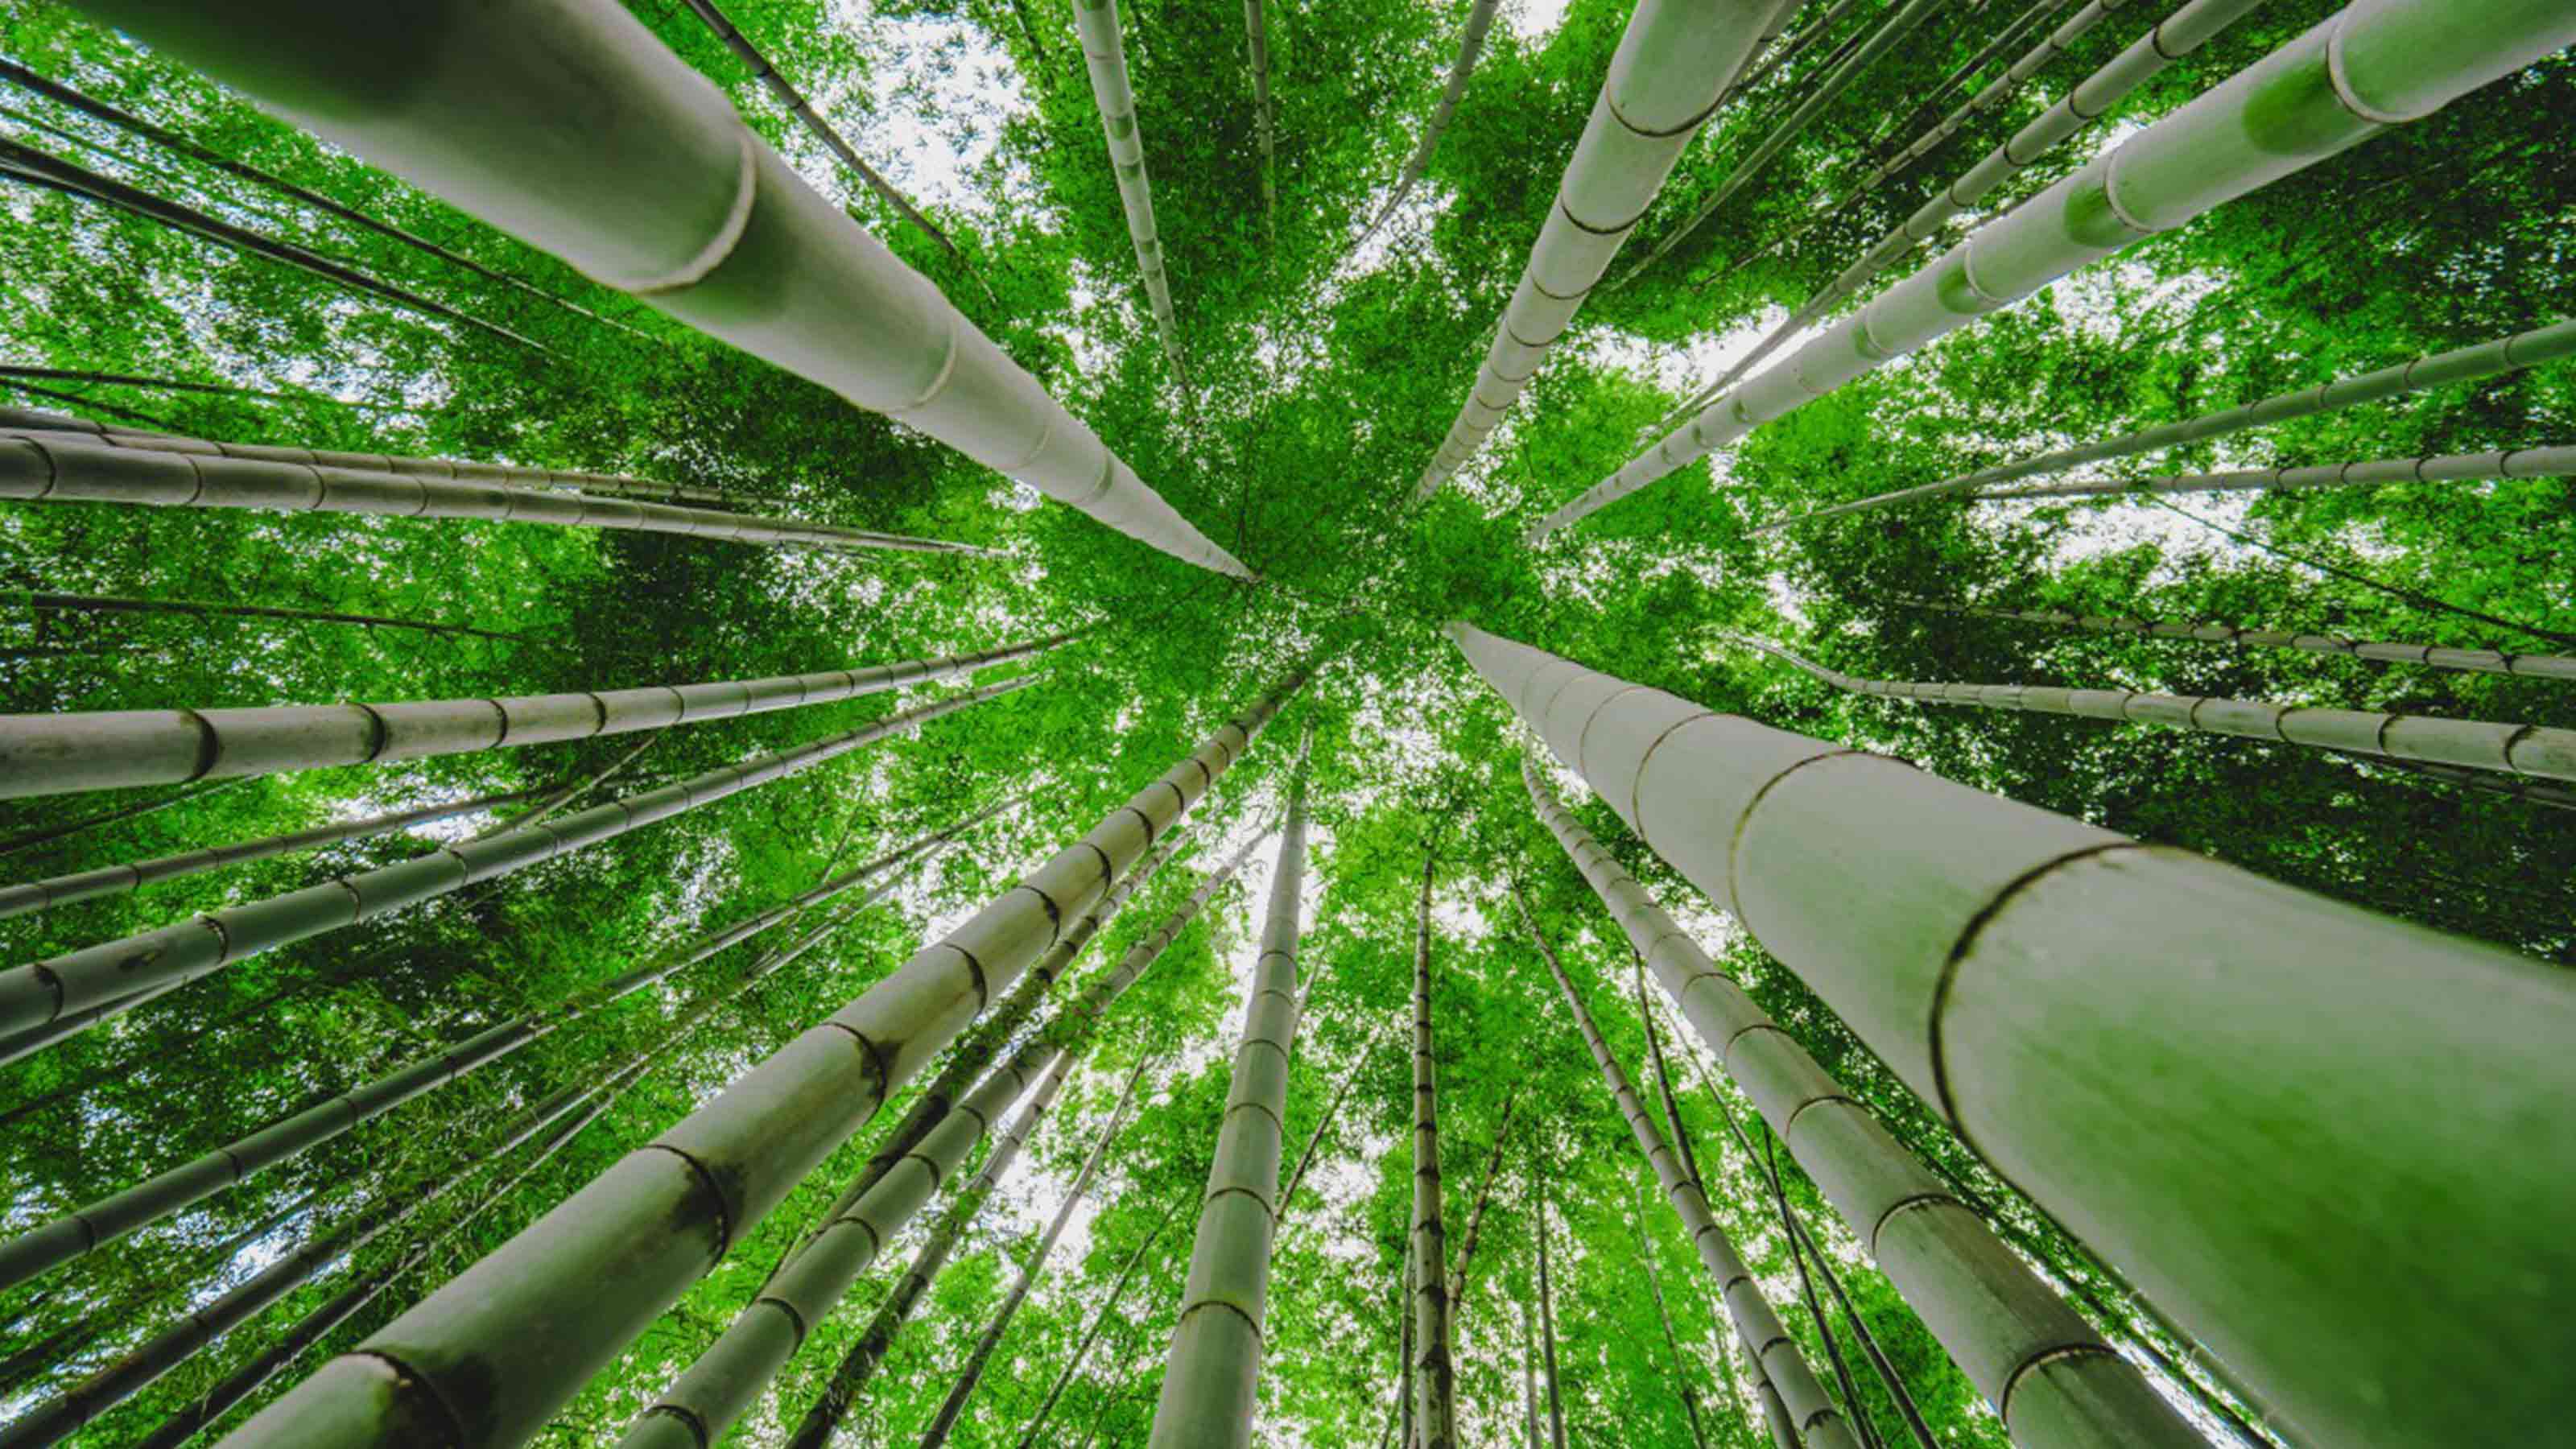 Worm's eye view of bamboo farm